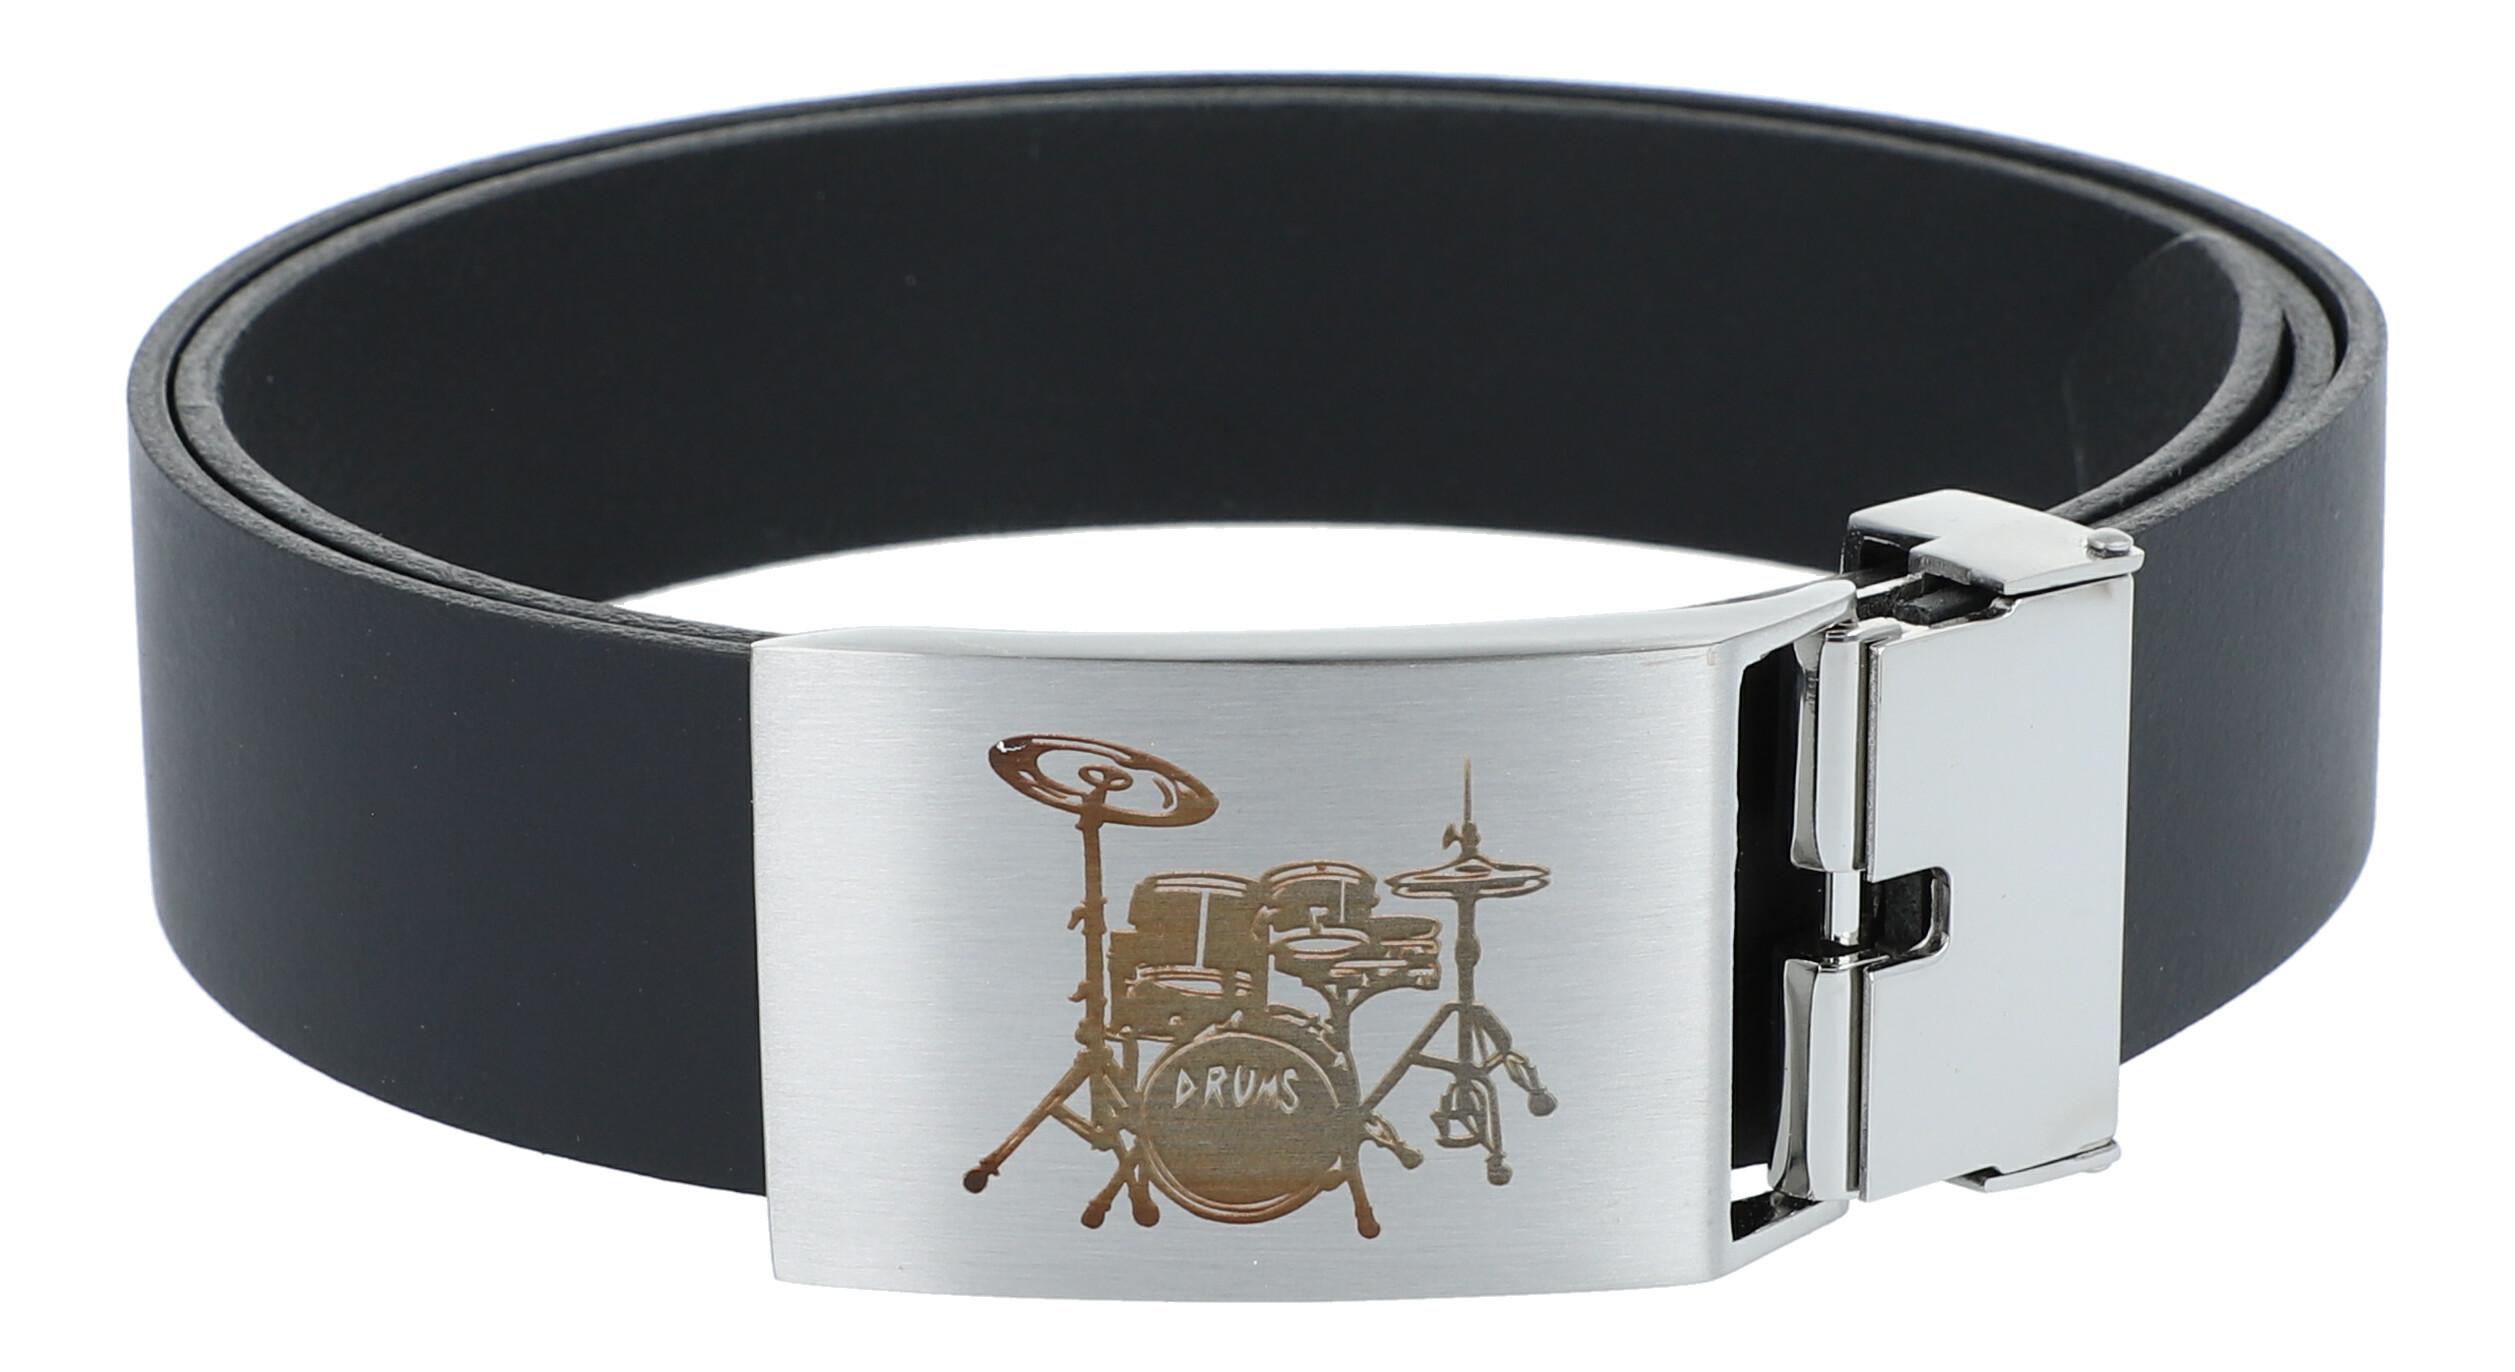 Leather belt with metal buckle, motif drums